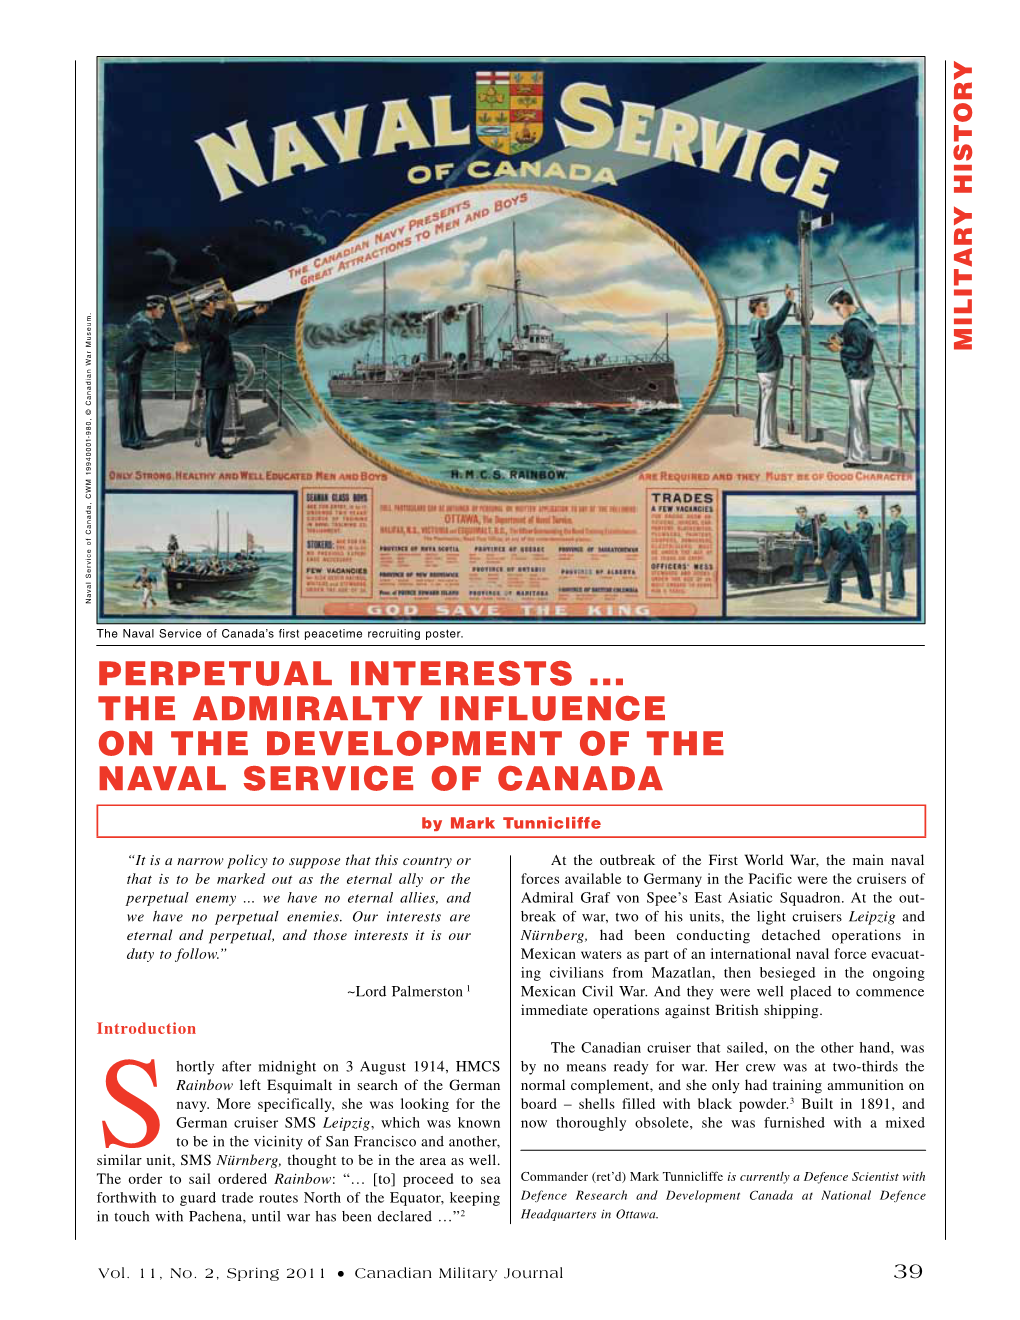 Perpetual Interests ... the Admiralty Influence on the Development of the Naval Service of Canada